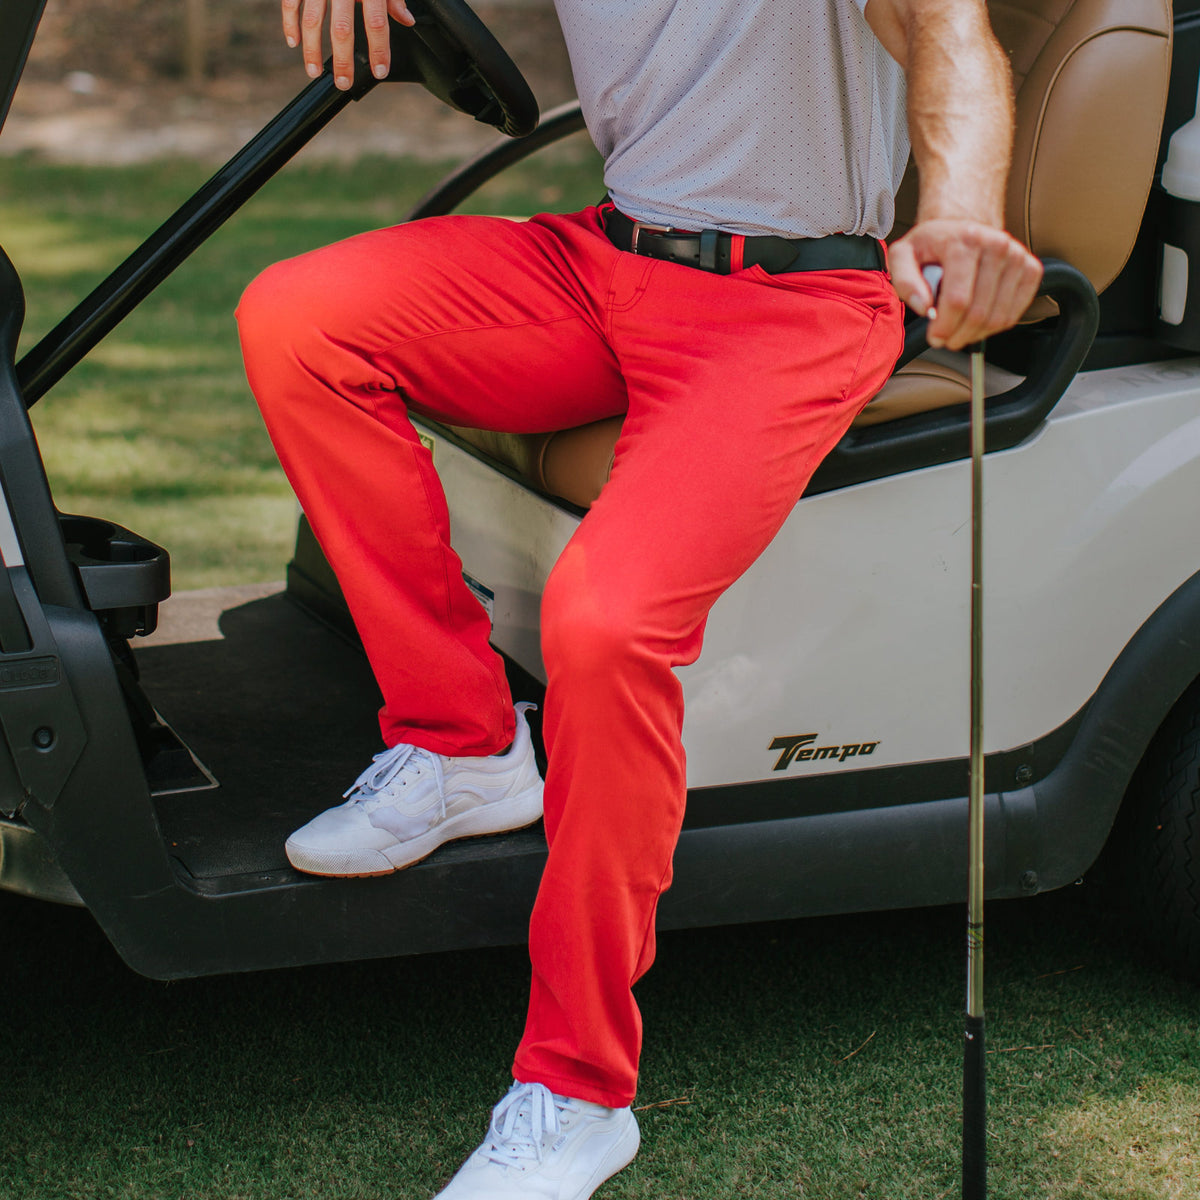 Men Outfits with Red Pants-30 Ways for Guys to Wear Red Pants